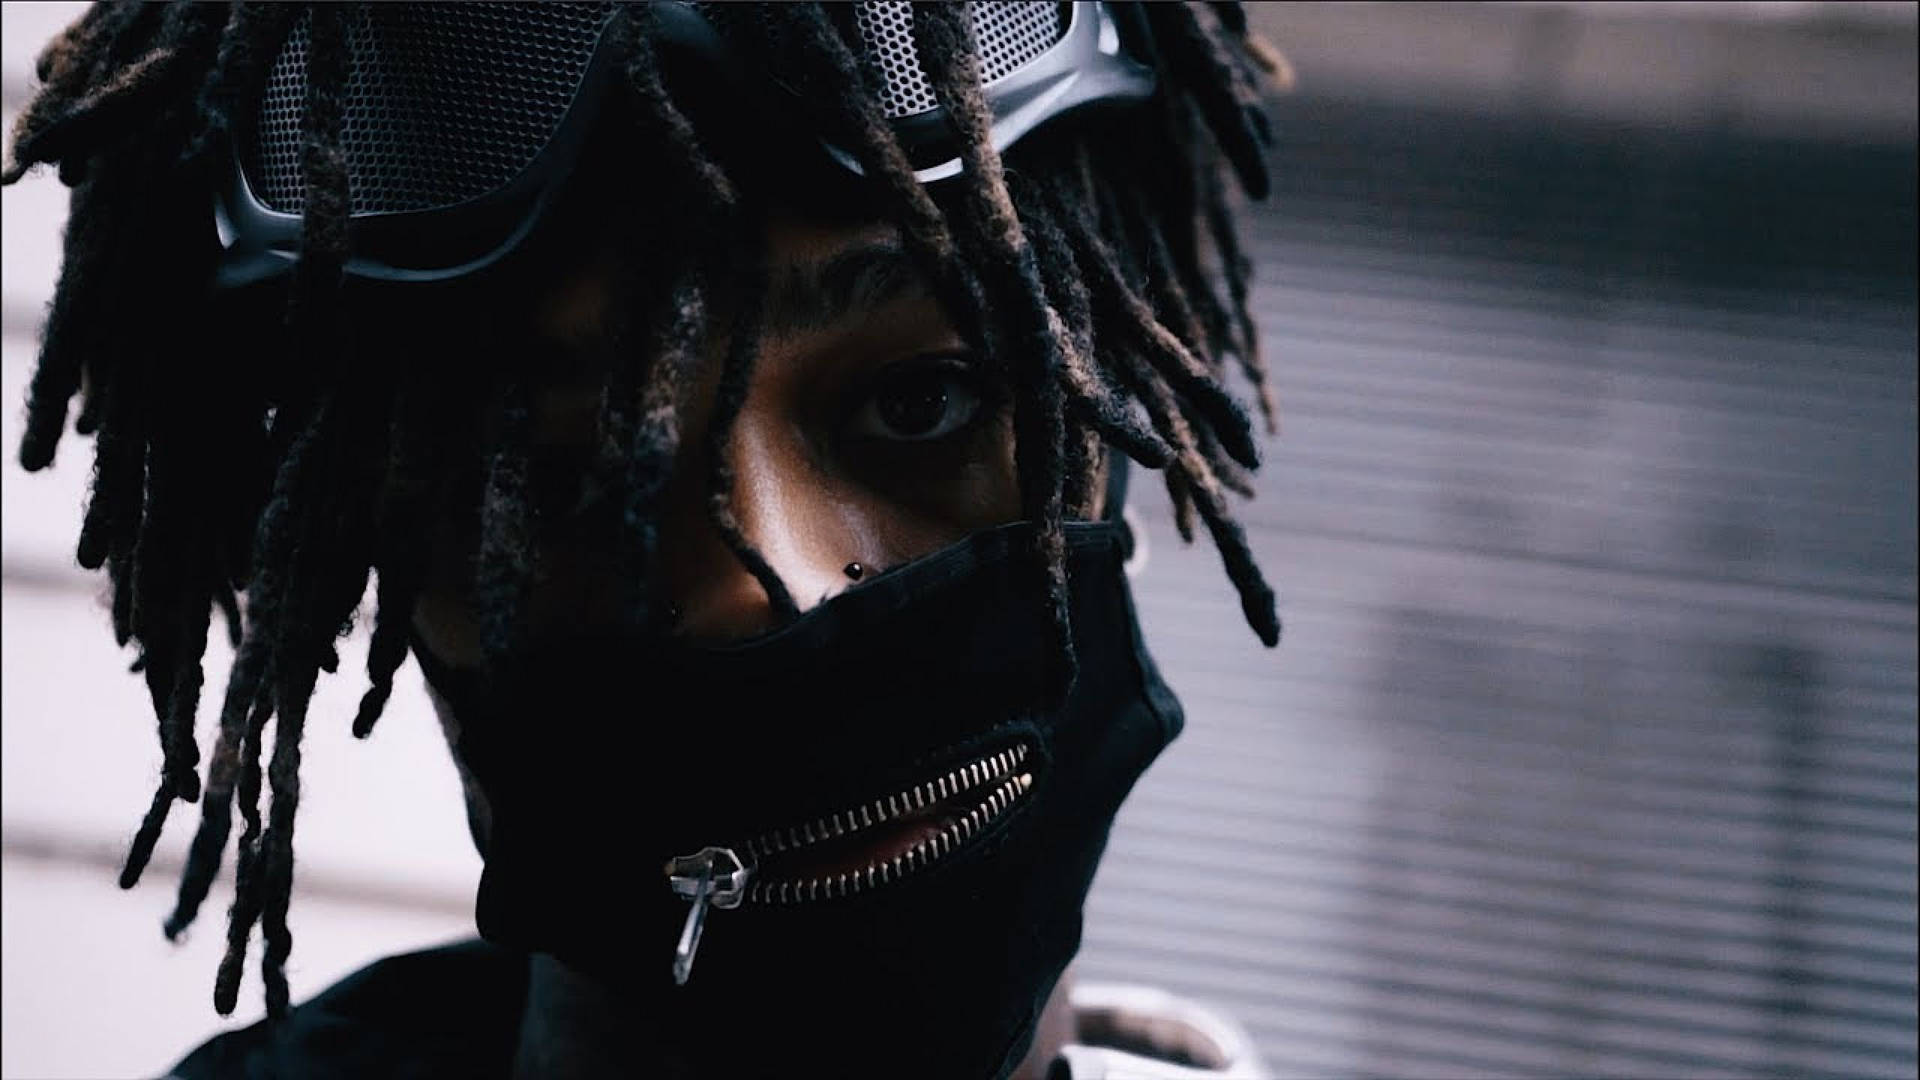 Scarlxrd 2560X1440 Wallpaper and Background Image